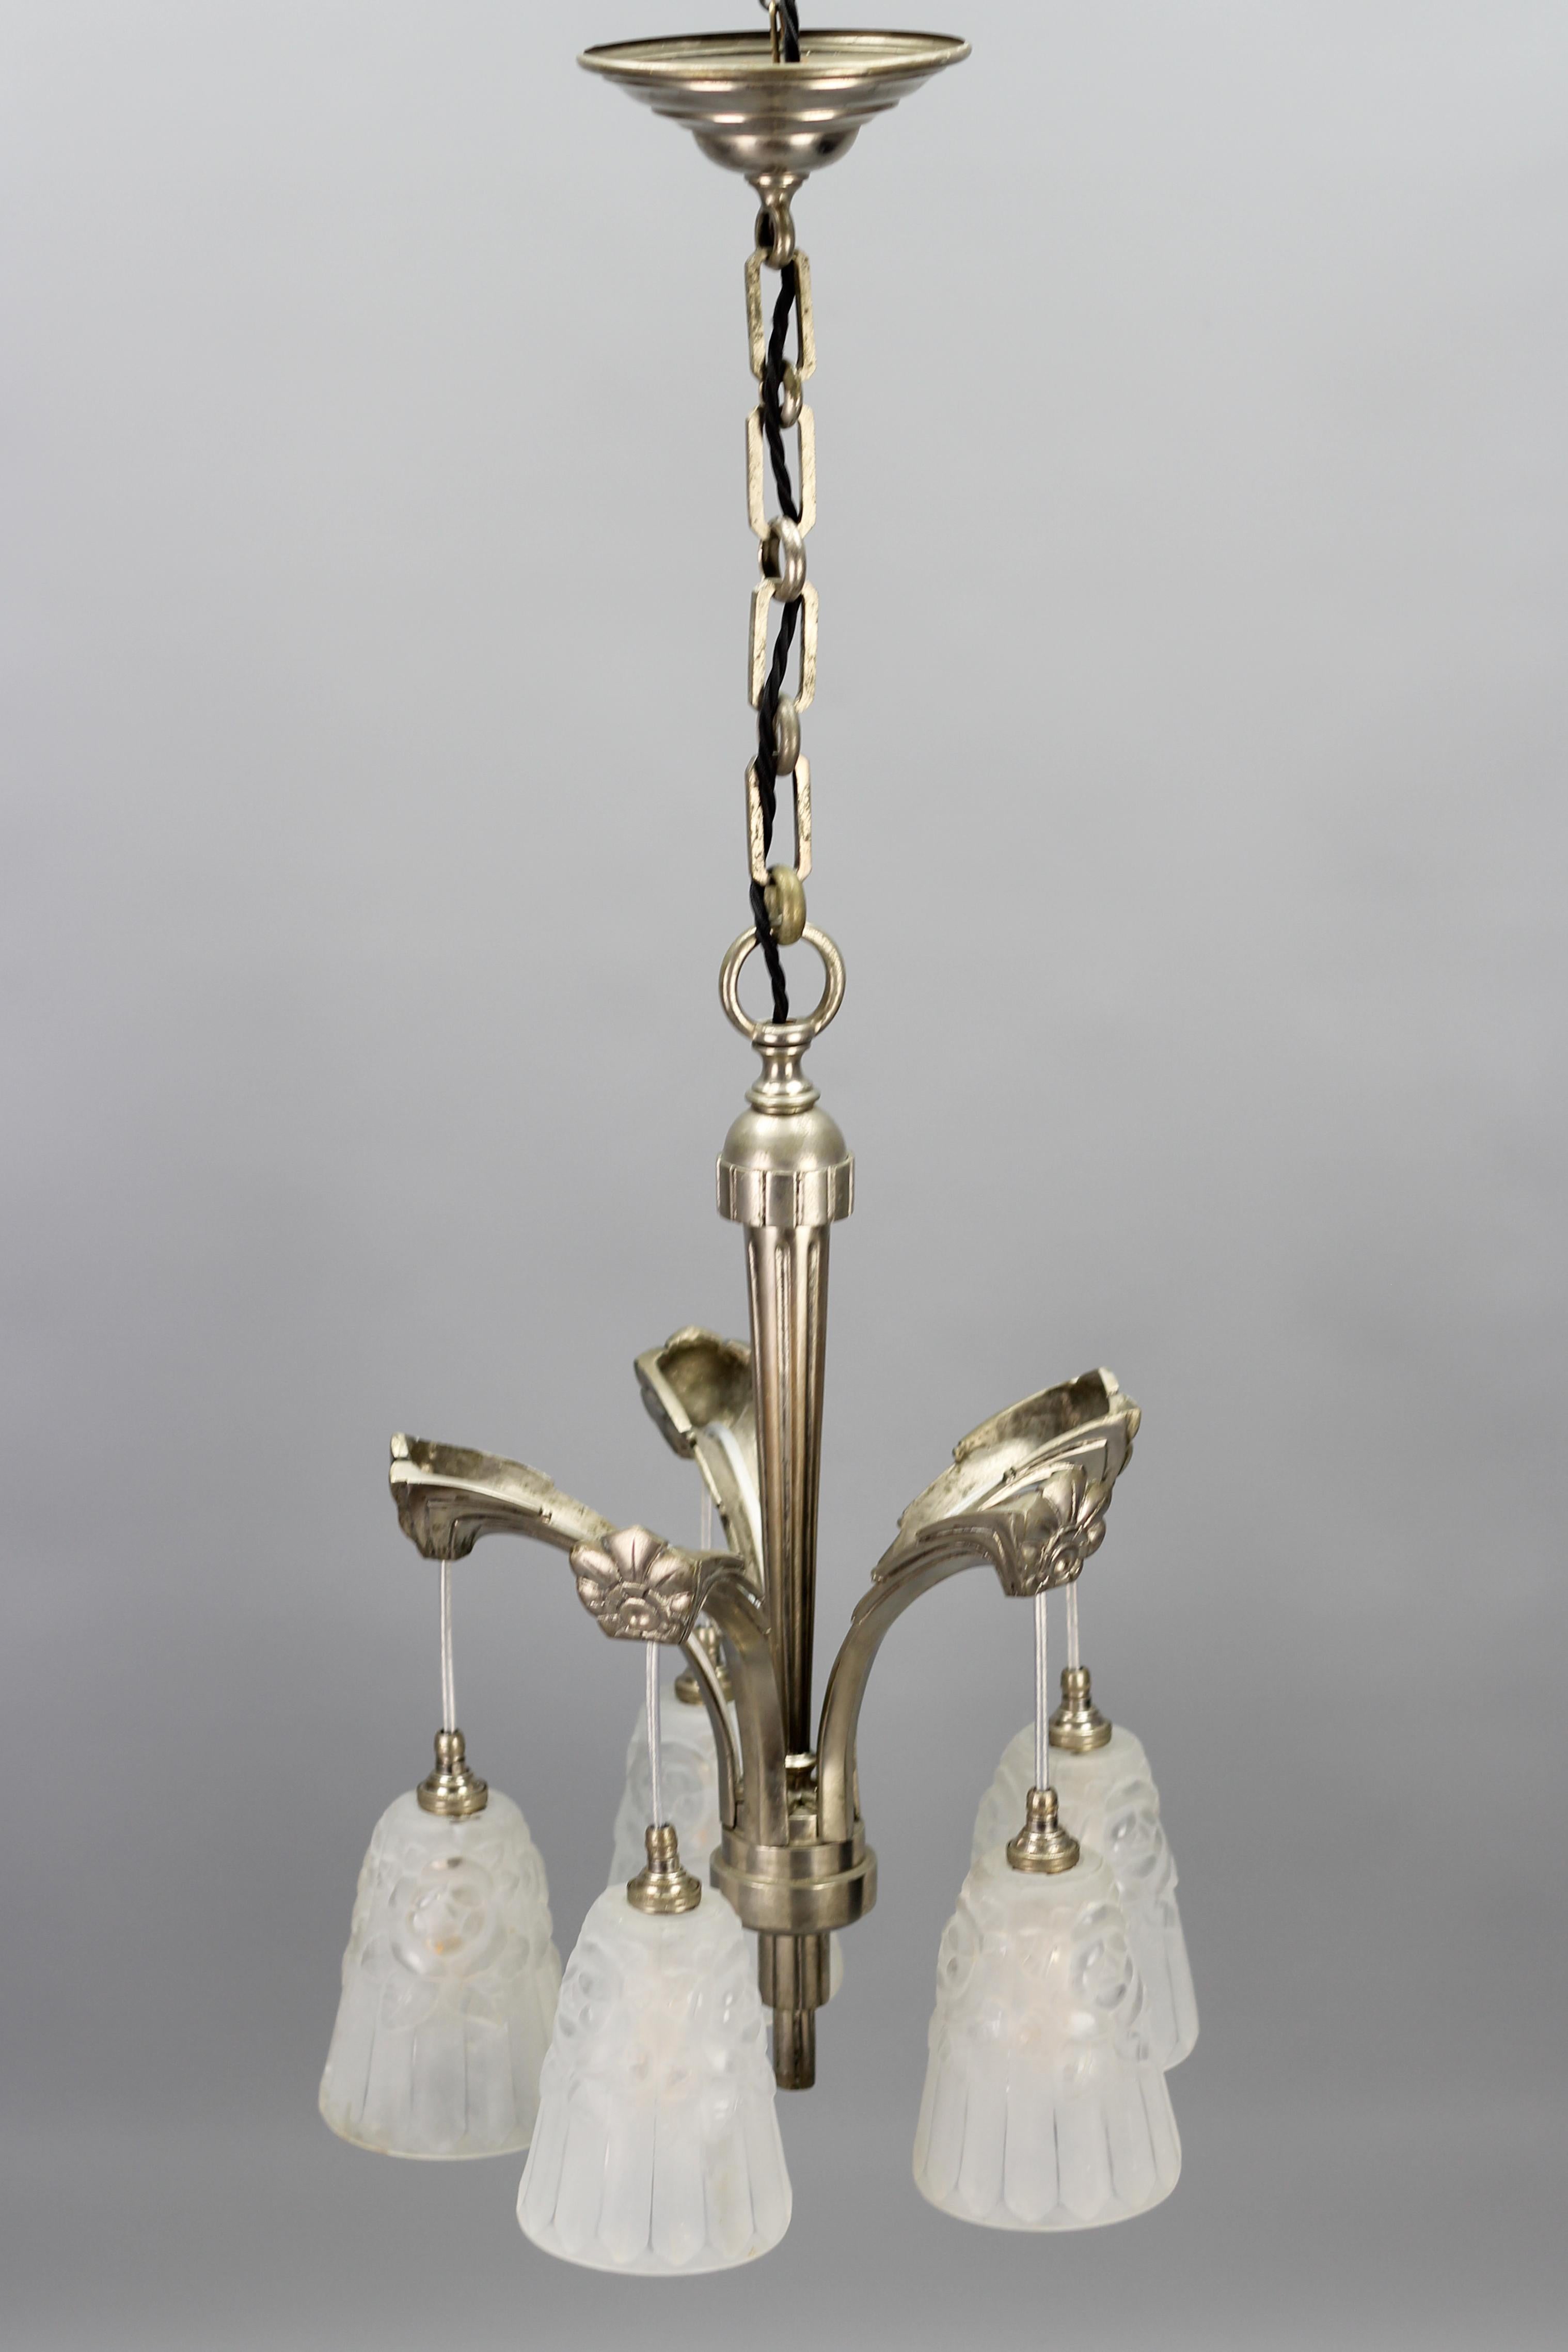 French Art Deco Brass Five-Light Chandelier with White Glass by Degué, 1930s For Sale 2